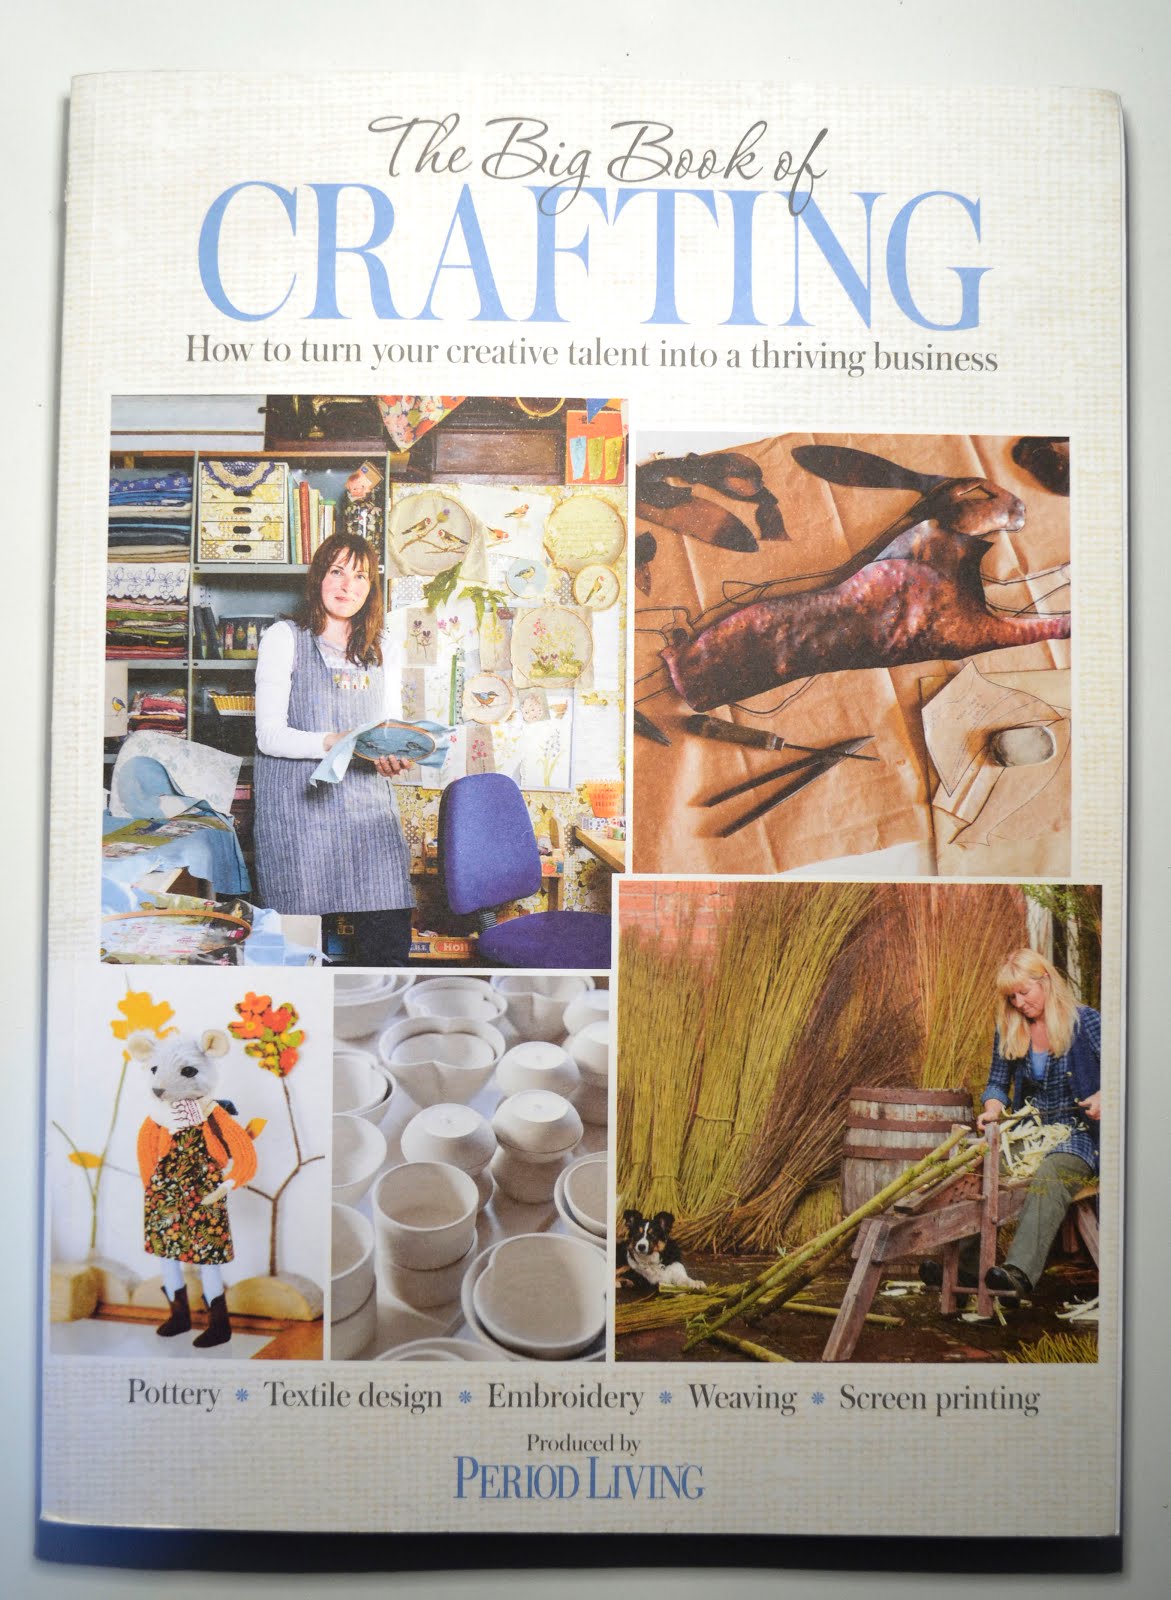 Period Living Magazine - The Big Book of Crafting